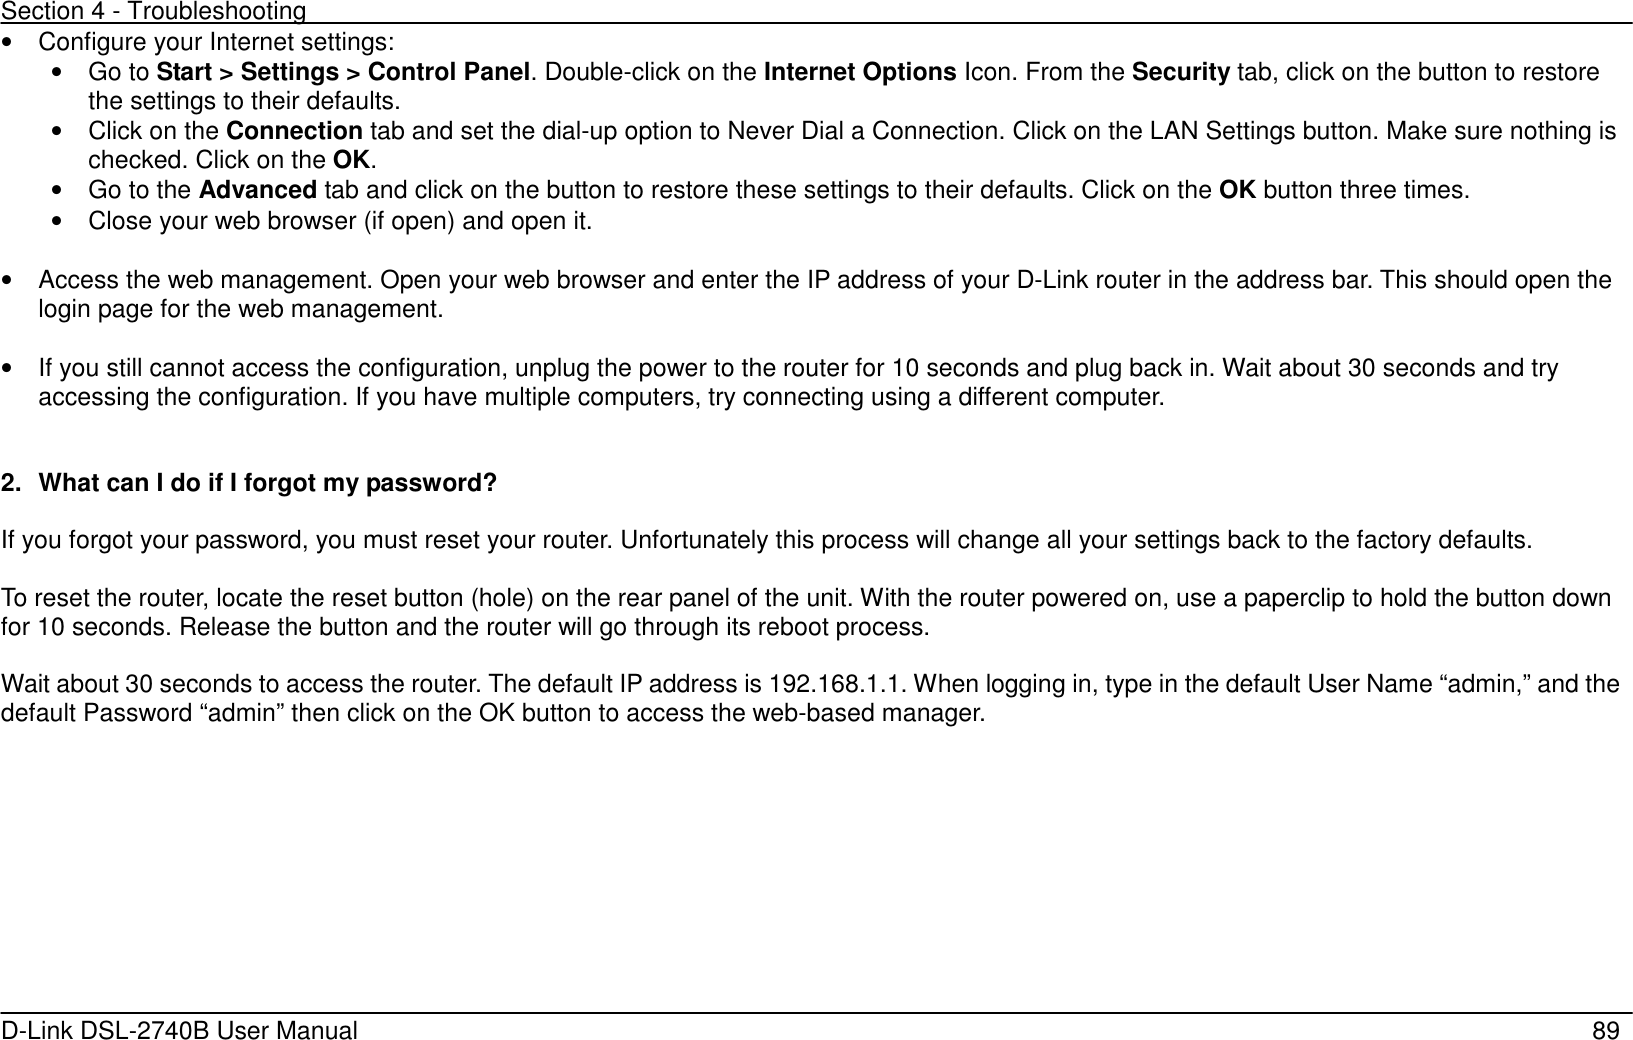 Section 4 - Troubleshooting   D-Link DSL-2740B User Manual                                                  89 •  Configure your Internet settings: •  Go to Start &gt; Settings &gt; Control Panel. Double-click on the Internet Options Icon. From the Security tab, click on the button to restore the settings to their defaults.   •  Click on the Connection tab and set the dial-up option to Never Dial a Connection. Click on the LAN Settings button. Make sure nothing is checked. Click on the OK. •  Go to the Advanced tab and click on the button to restore these settings to their defaults. Click on the OK button three times.   •  Close your web browser (if open) and open it.  •  Access the web management. Open your web browser and enter the IP address of your D-Link router in the address bar. This should open the login page for the web management.    •  If you still cannot access the configuration, unplug the power to the router for 10 seconds and plug back in. Wait about 30 seconds and try accessing the configuration. If you have multiple computers, try connecting using a different computer.   2.  What can I do if I forgot my password?  If you forgot your password, you must reset your router. Unfortunately this process will change all your settings back to the factory defaults.  To reset the router, locate the reset button (hole) on the rear panel of the unit. With the router powered on, use a paperclip to hold the button down for 10 seconds. Release the button and the router will go through its reboot process.    Wait about 30 seconds to access the router. The default IP address is 192.168.1.1. When logging in, type in the default User Name “admin,” and the default Password “admin” then click on the OK button to access the web-based manager. 